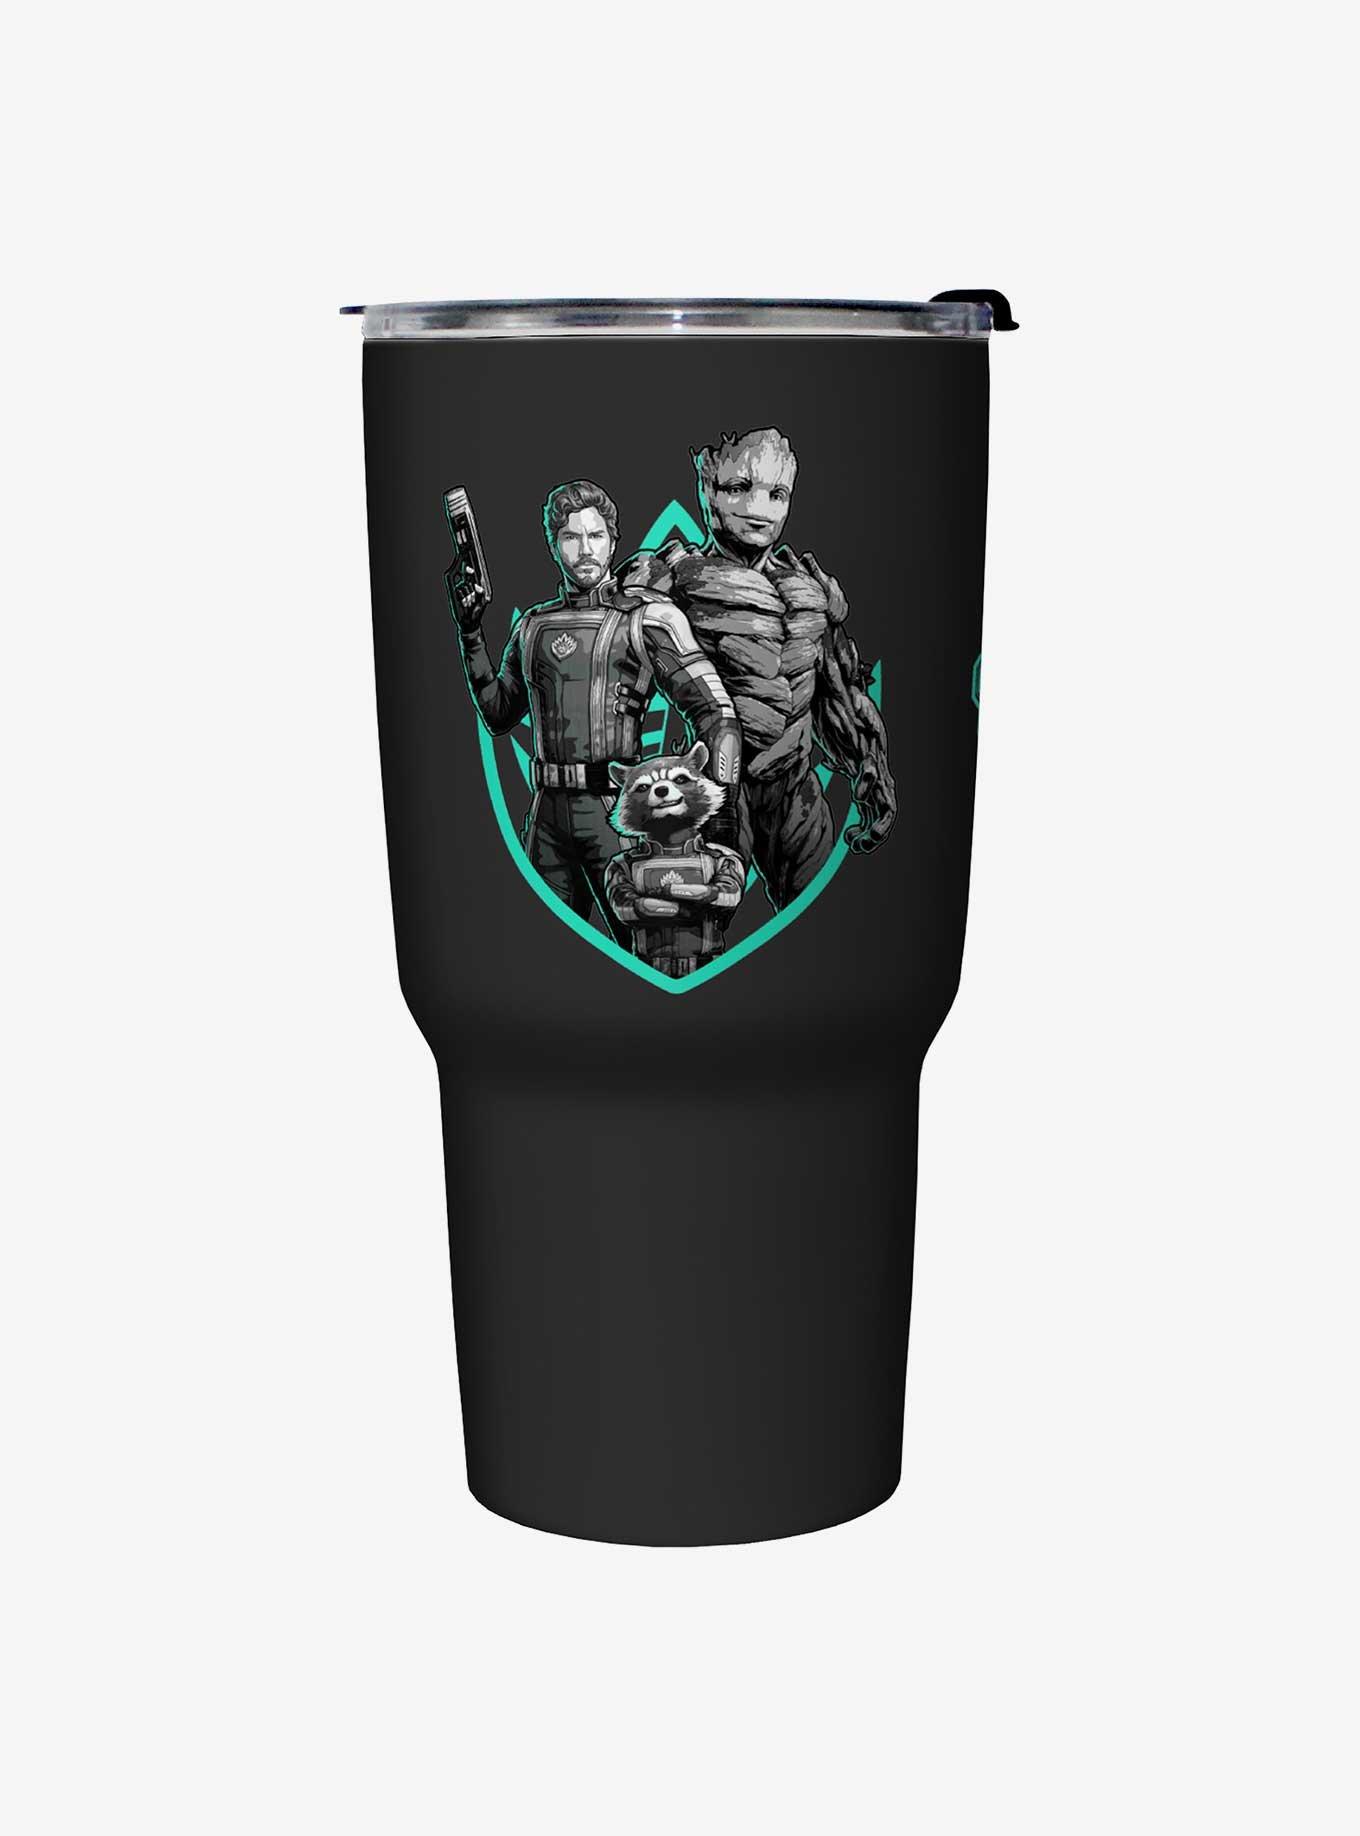 Marvel Guardians of the Galaxy Vol. 3 Star-Lord Groot and Rocket Travel Mug